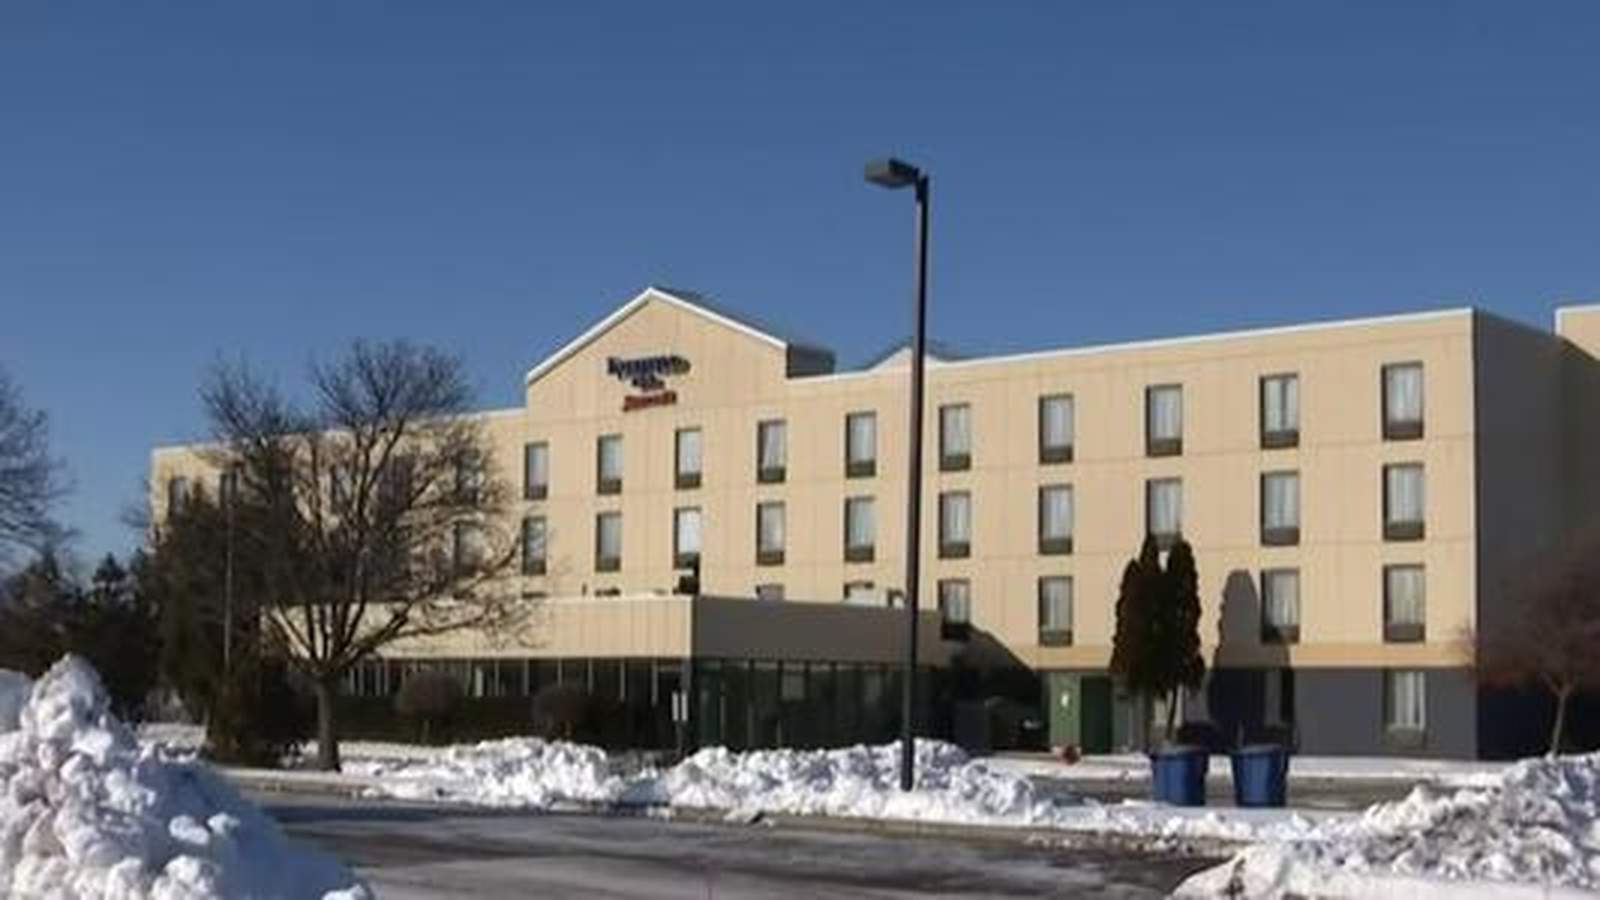 Lawsuit Claims Detroit Ann Arbor Hotels Ignored Signs Of Human